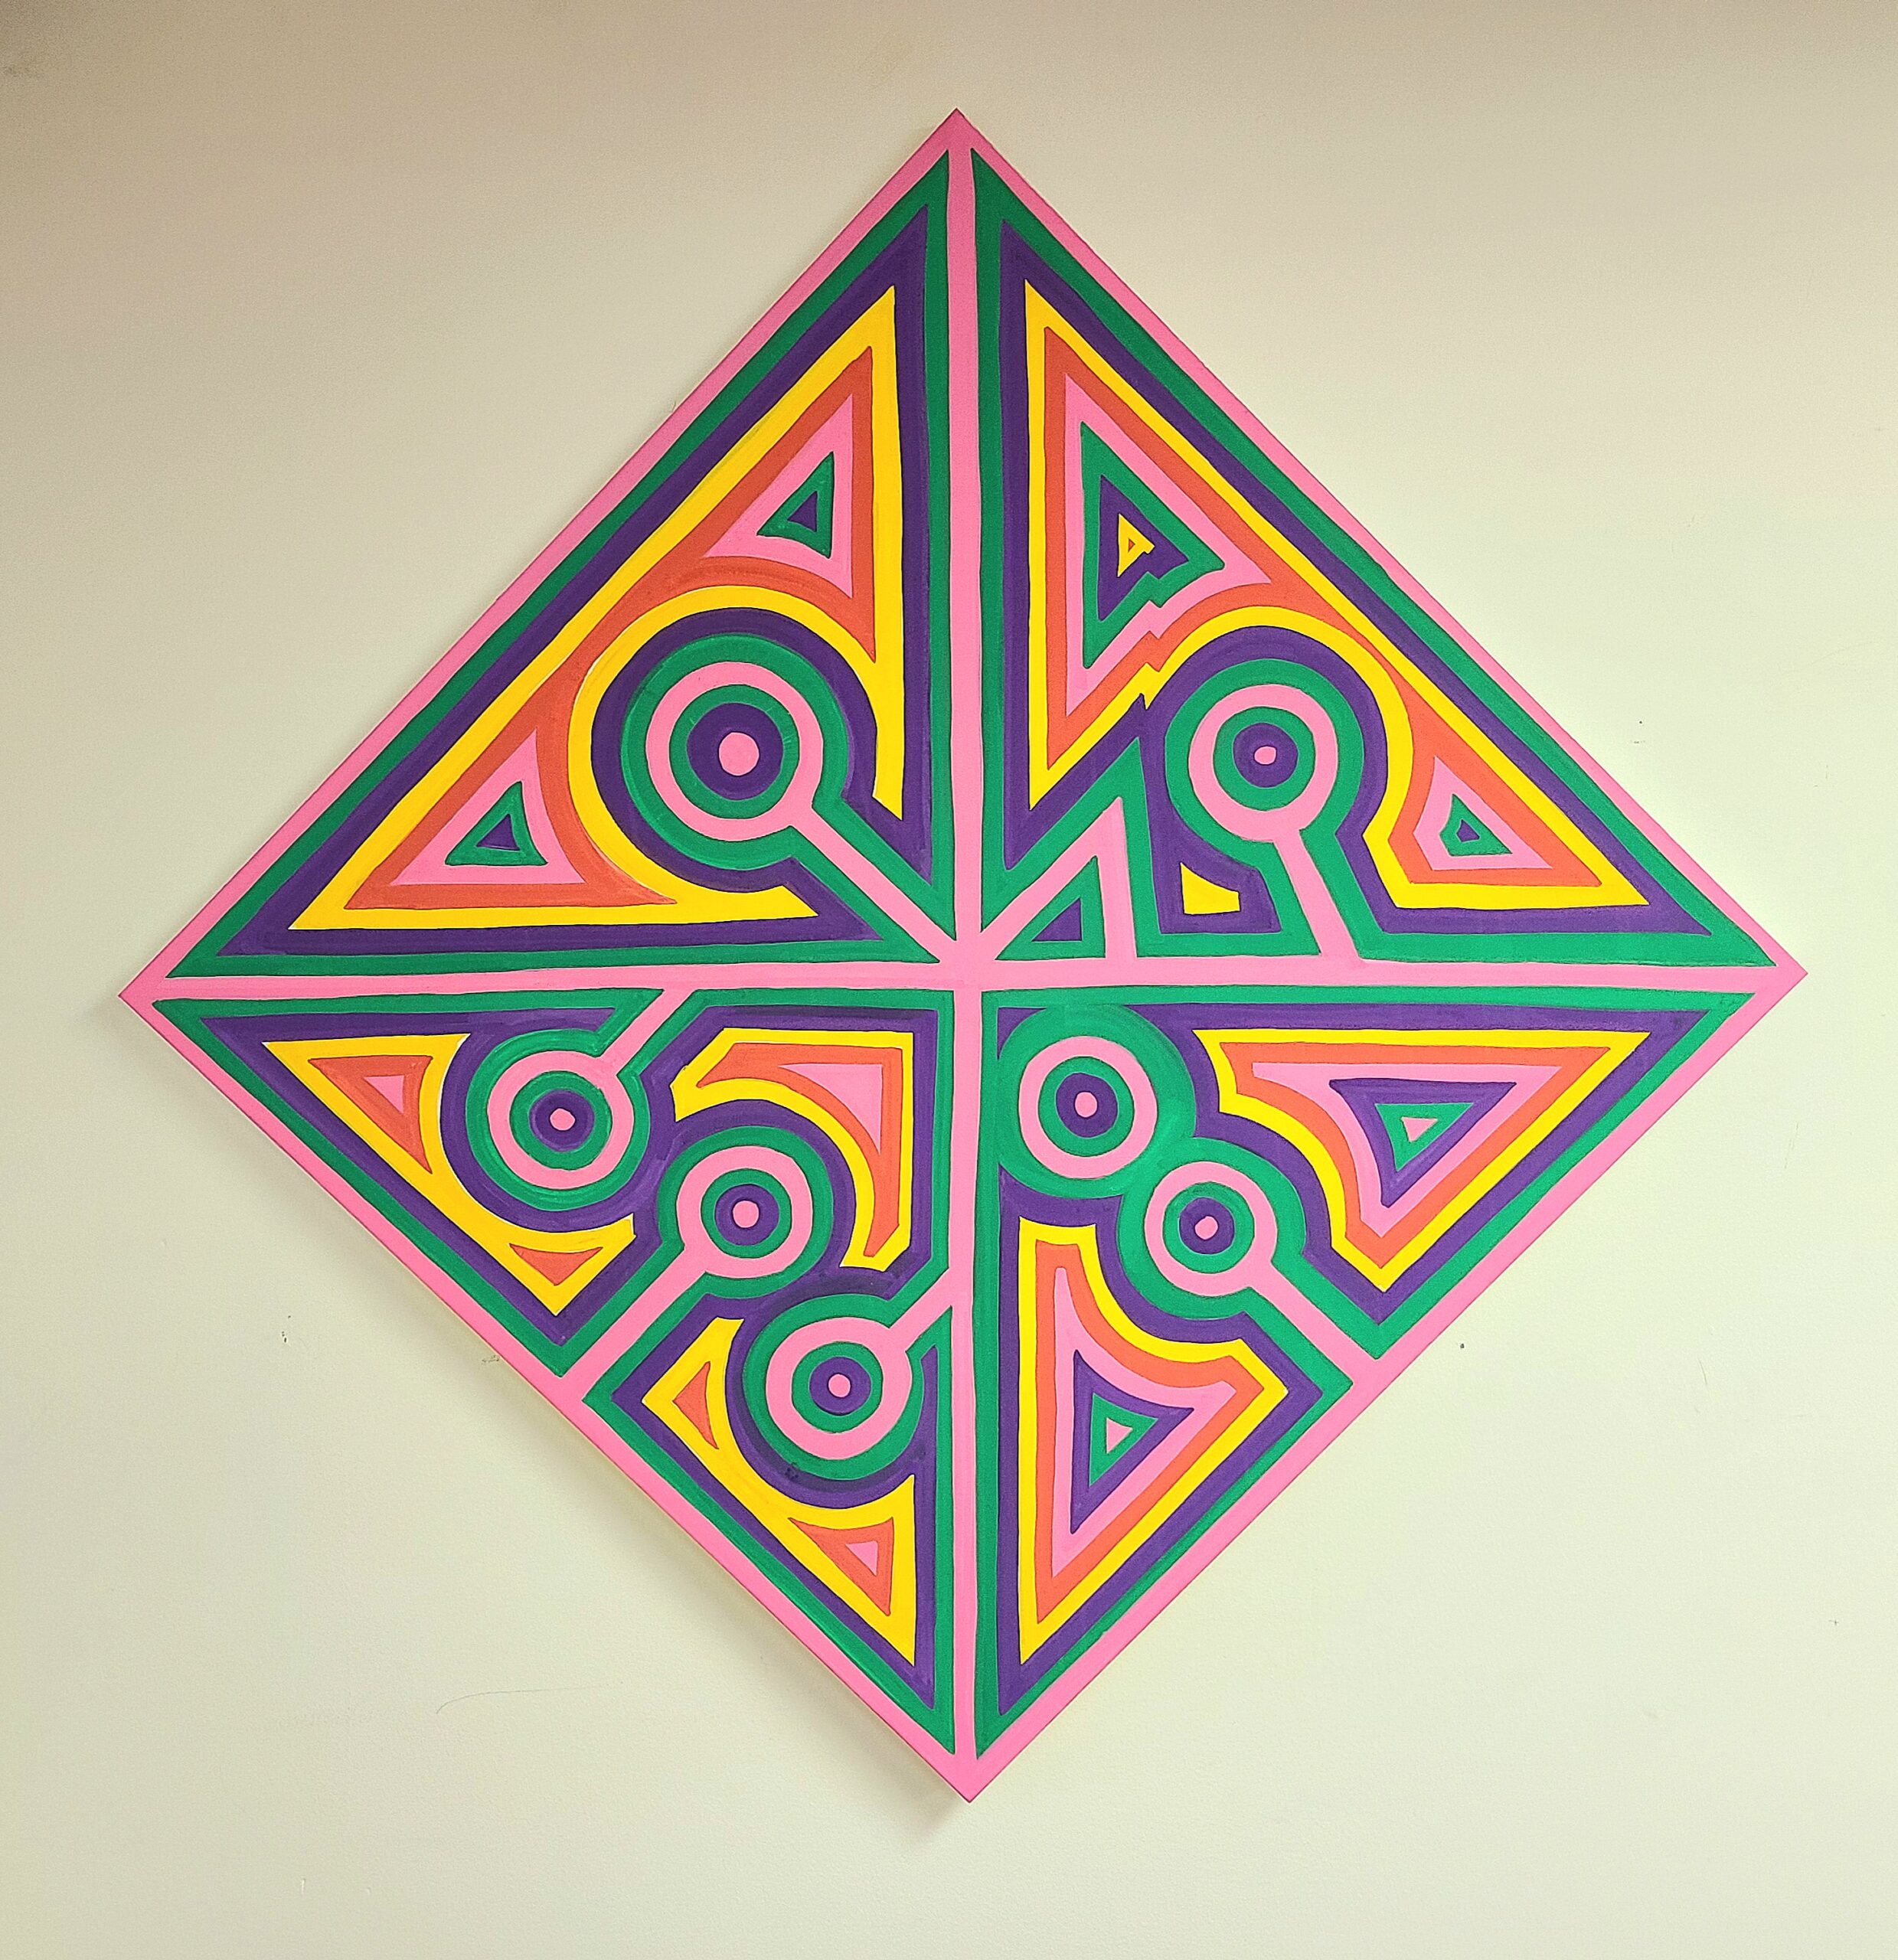 The image shows a piece of artwork by Cody Aguirre. It is a diamond-shaped canvas divided into symmetrical sections, each filled with vibrant and contrasting colors such as pink, yellow, green, and purple. The design features a combination of geometric patterns, including triangles and circles, with circular patterns at the tips of the diamond.